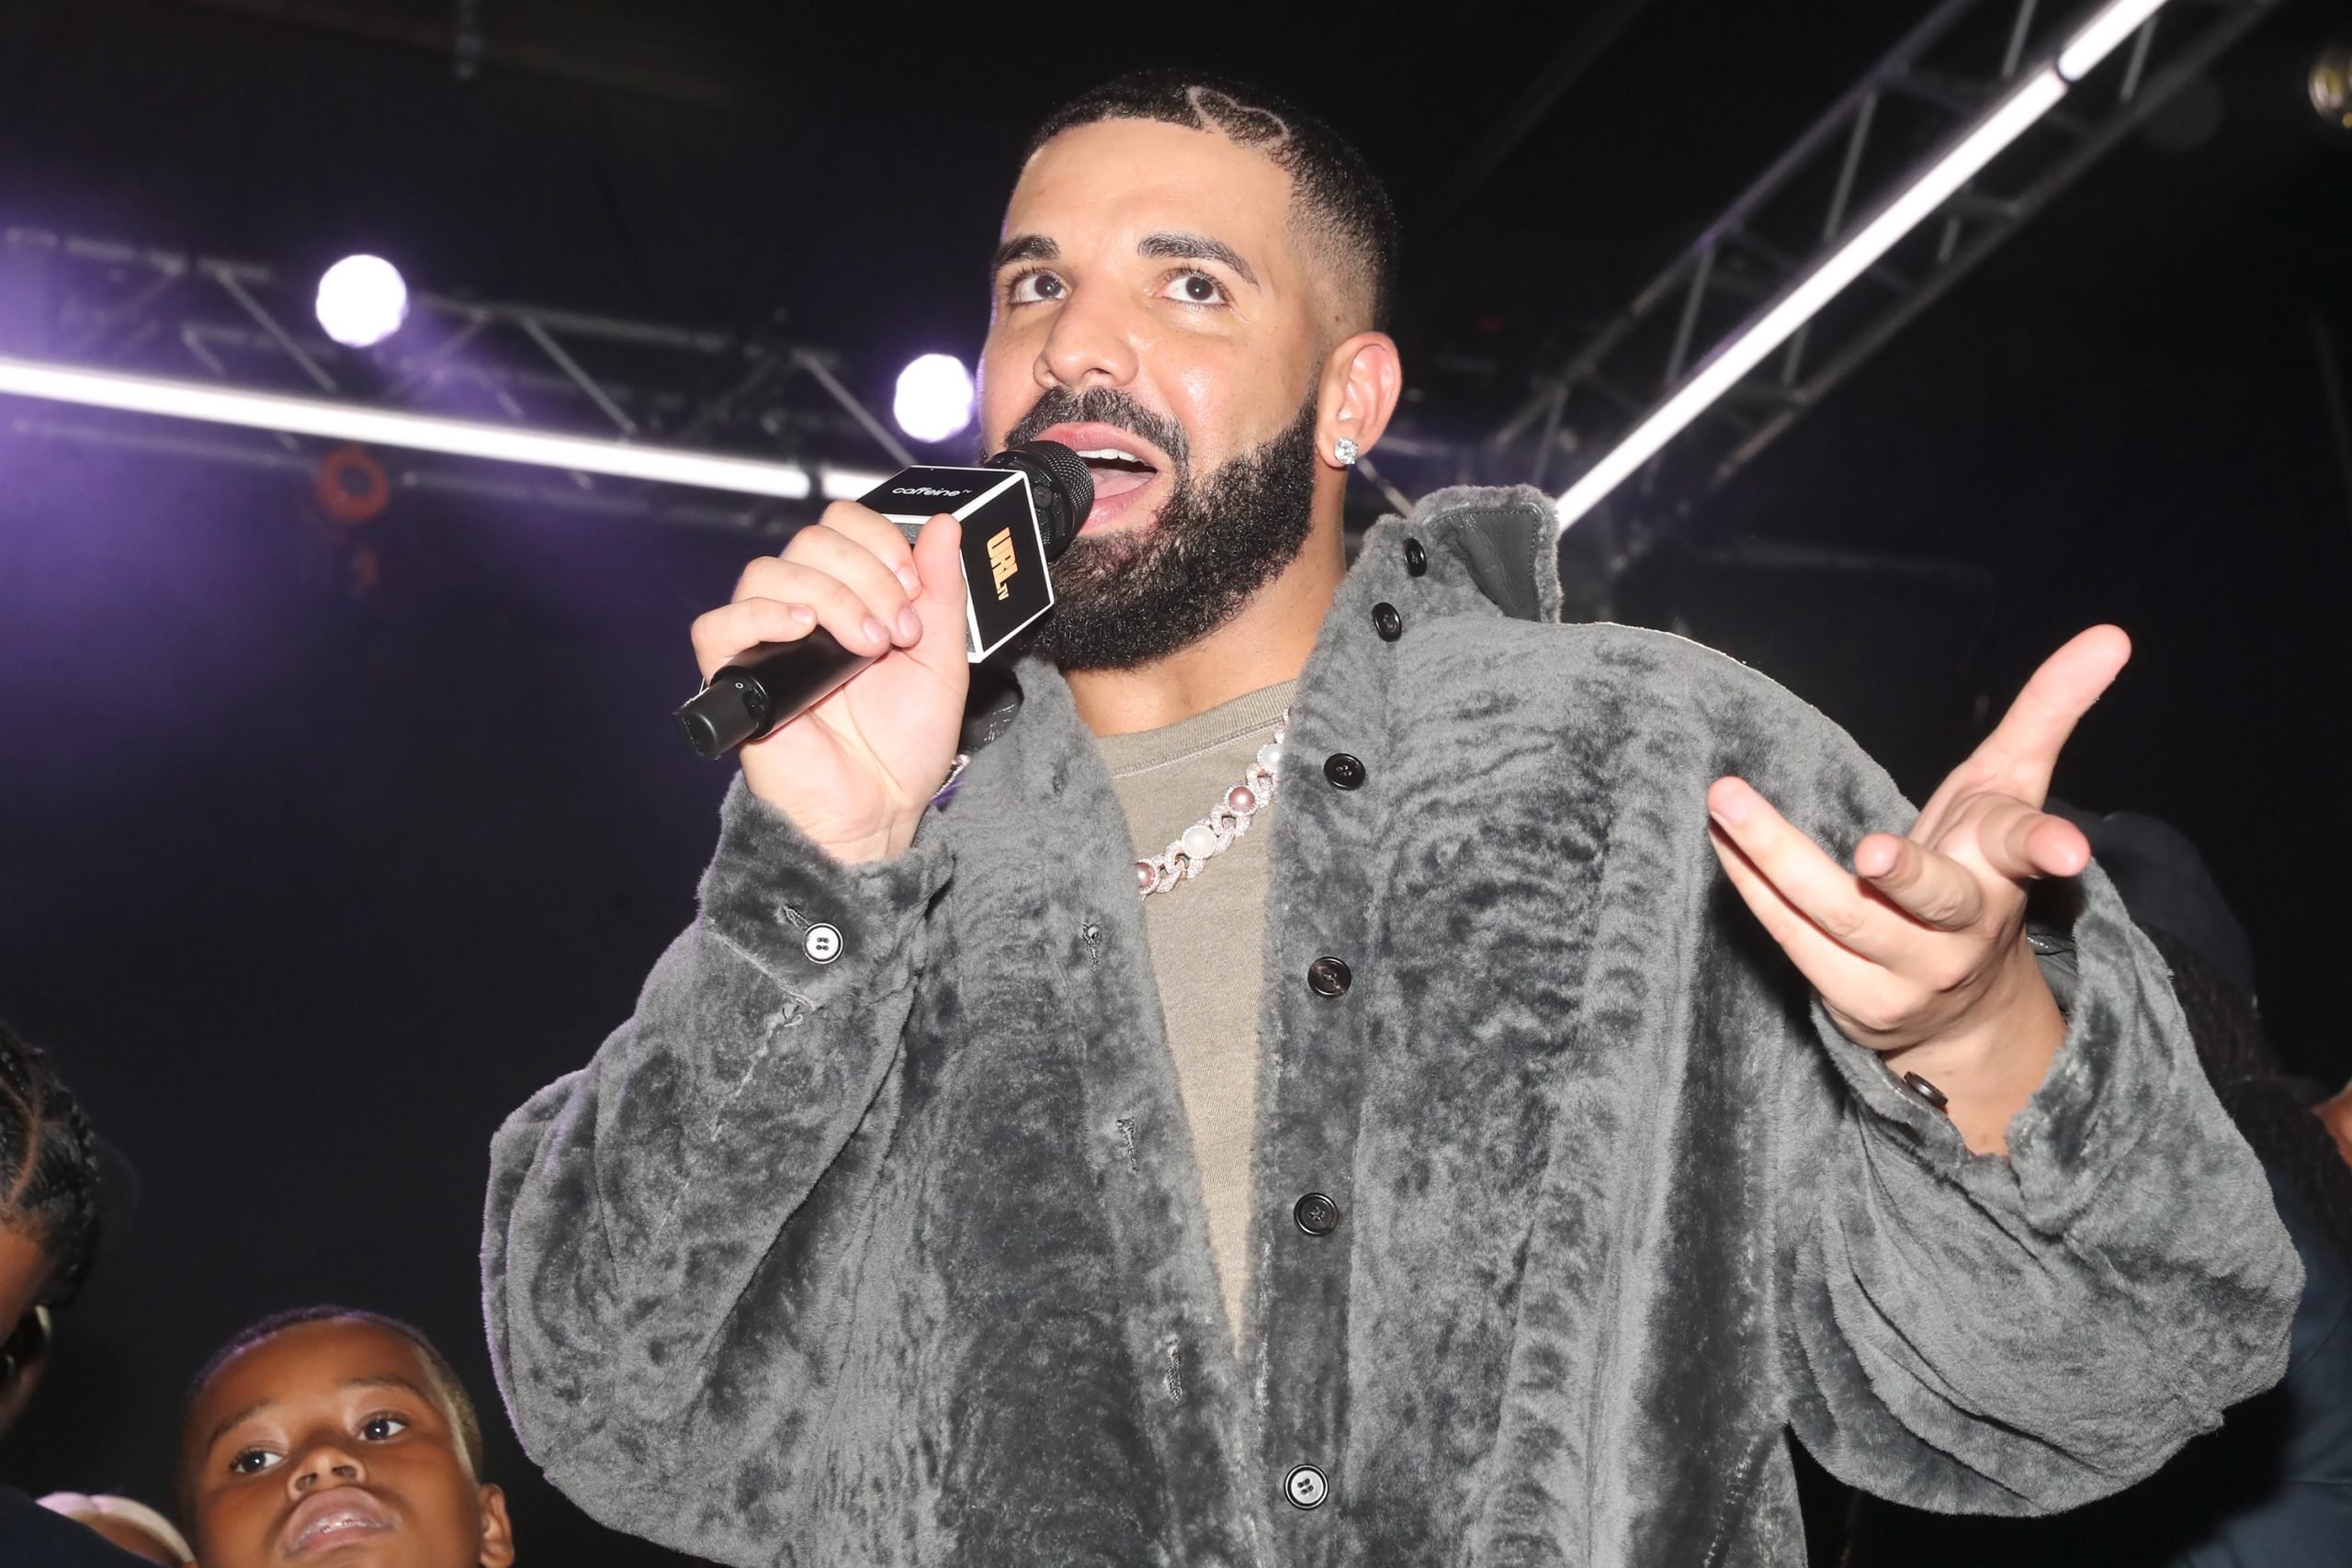 Drake, who just dropped 'Honestly, Nevermind,' speaks into a microphone.